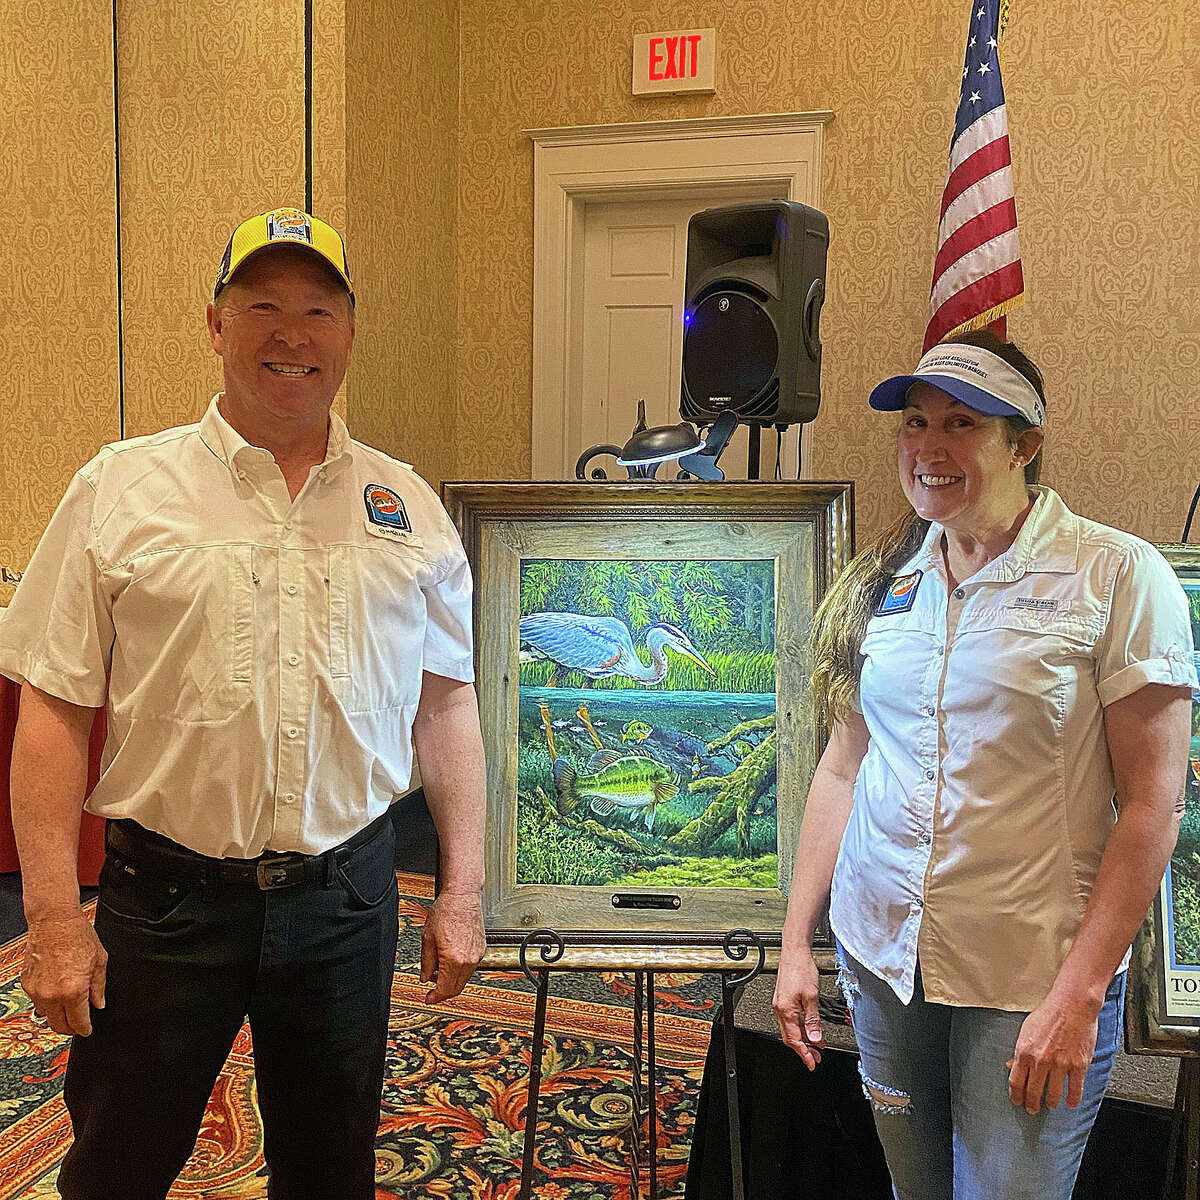 Bruce and Denise Rogers placed the highest bid on artist Eddie Pastureau’s original painting titled “Double Jeopardy on Toledo Bend.”